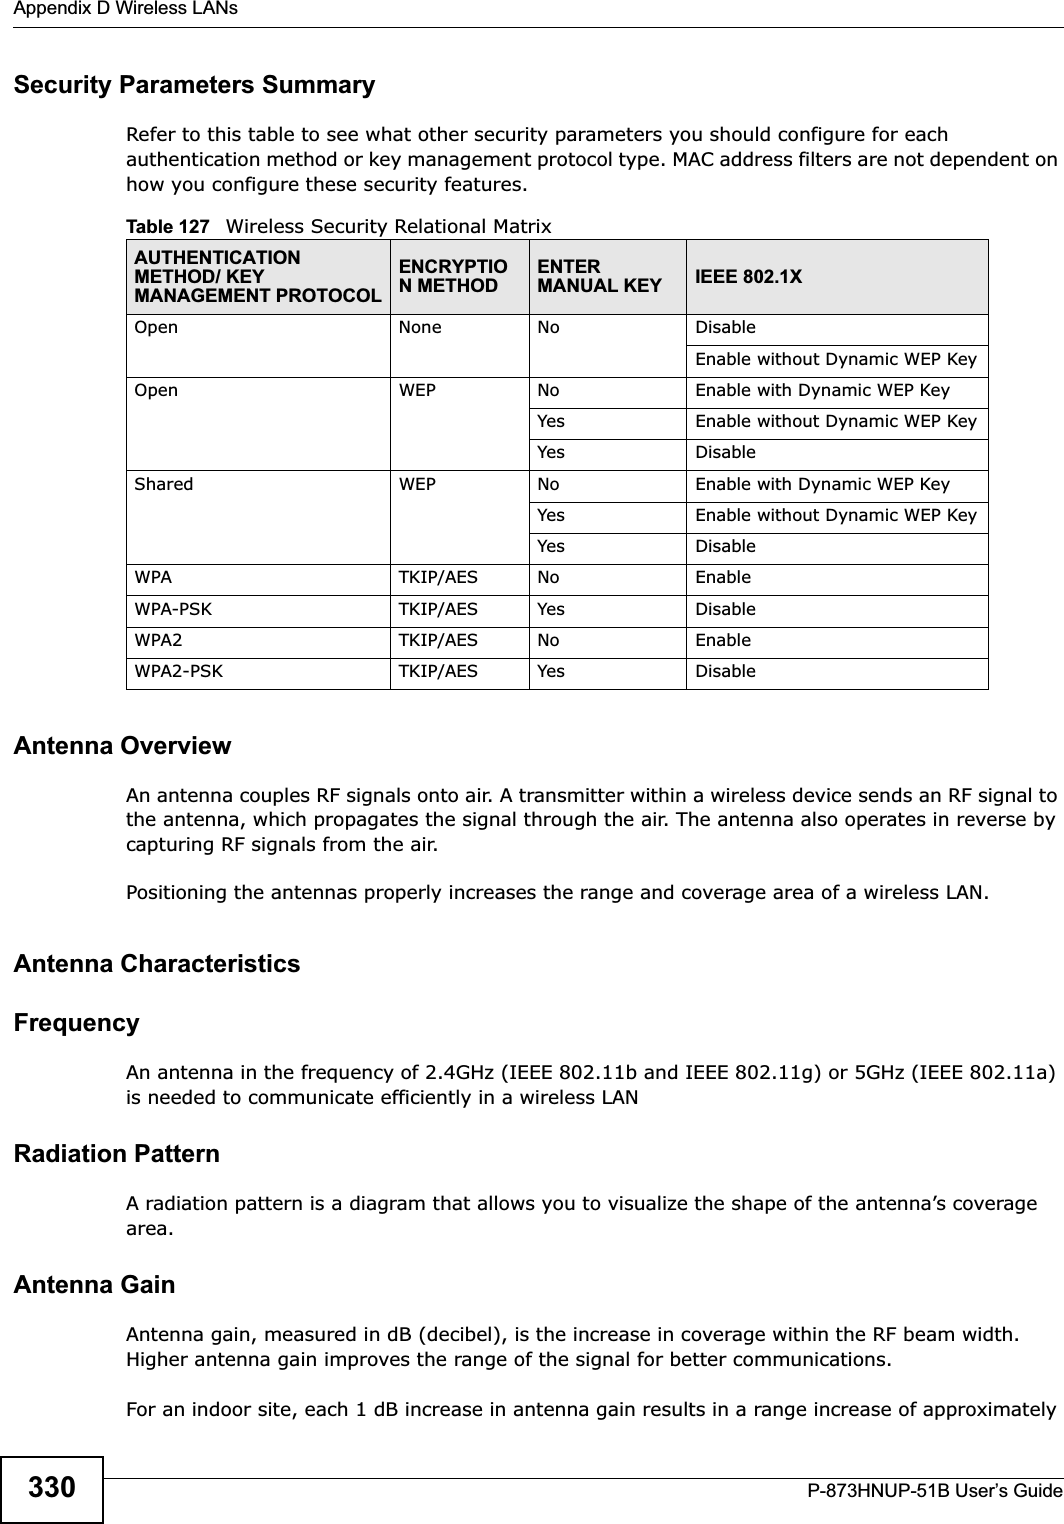 Appendix D Wireless LANsP-873HNUP-51B User’s Guide330Security Parameters SummaryRefer to this table to see what other security parameters you should configure for each authentication method or key management protocol type. MAC address filters are not dependent on how you configure these security features.Antenna OverviewAn antenna couples RF signals onto air. A transmitter within a wireless device sends an RF signal to the antenna, which propagates the signal through the air. The antenna also operates in reverse by capturing RF signals from the air. Positioning the antennas properly increases the range and coverage area of a wireless LAN. Antenna CharacteristicsFrequencyAn antenna in the frequency of 2.4GHz (IEEE 802.11b and IEEE 802.11g) or 5GHz (IEEE 802.11a) is needed to communicate efficiently in a wireless LANRadiation PatternA radiation pattern is a diagram that allows you to visualize the shape of the antenna’s coverage area.Antenna GainAntenna gain, measured in dB (decibel), is the increase in coverage within the RF beam width. Higher antenna gain improves the range of the signal for better communications. For an indoor site, each 1 dB increase in antenna gain results in a range increase of approximately Table 127   Wireless Security Relational MatrixAUTHENTICATION METHOD/ KEY MANAGEMENT PROTOCOLENCRYPTION METHODENTERMANUAL KEY IEEE 802.1XOpen None No DisableEnable without Dynamic WEP KeyOpen WEP No           Enable with Dynamic WEP KeyYes Enable without Dynamic WEP KeyYes DisableShared WEP  No           Enable with Dynamic WEP KeyYes Enable without Dynamic WEP KeyYes DisableWPA  TKIP/AES No EnableWPA-PSK  TKIP/AES Yes DisableWPA2 TKIP/AES No EnableWPA2-PSK  TKIP/AES Yes Disable